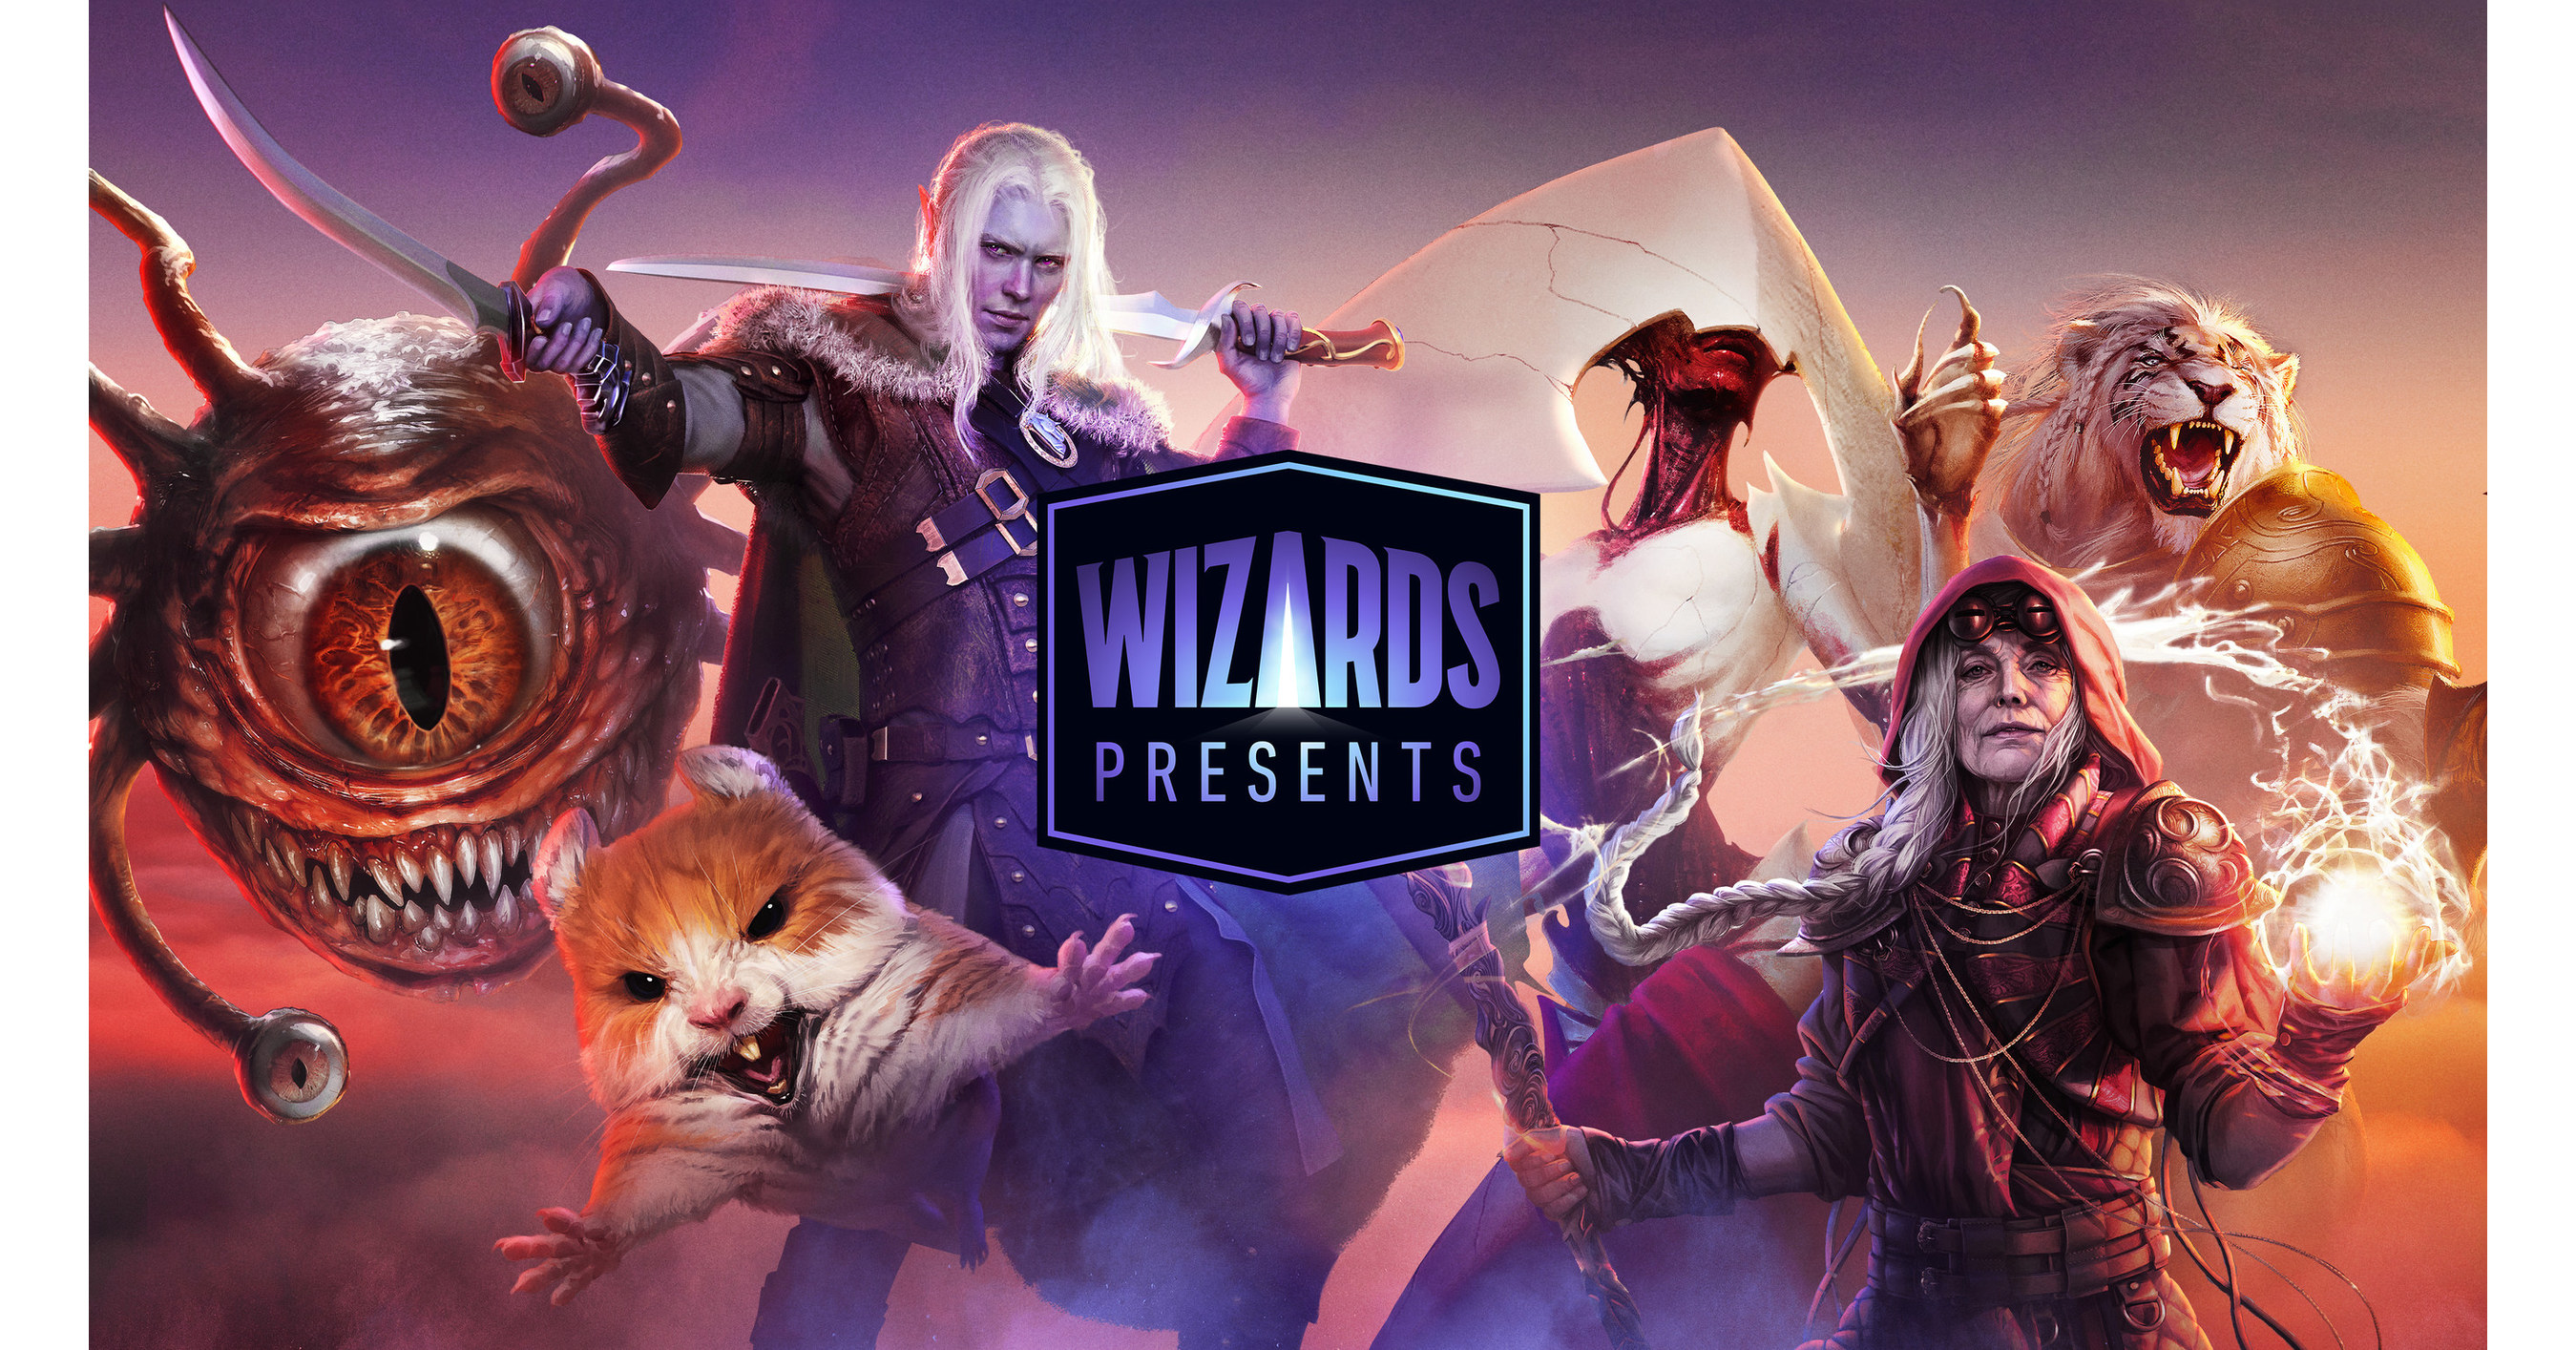 Wizards of the Coast will continue supporting third-party content